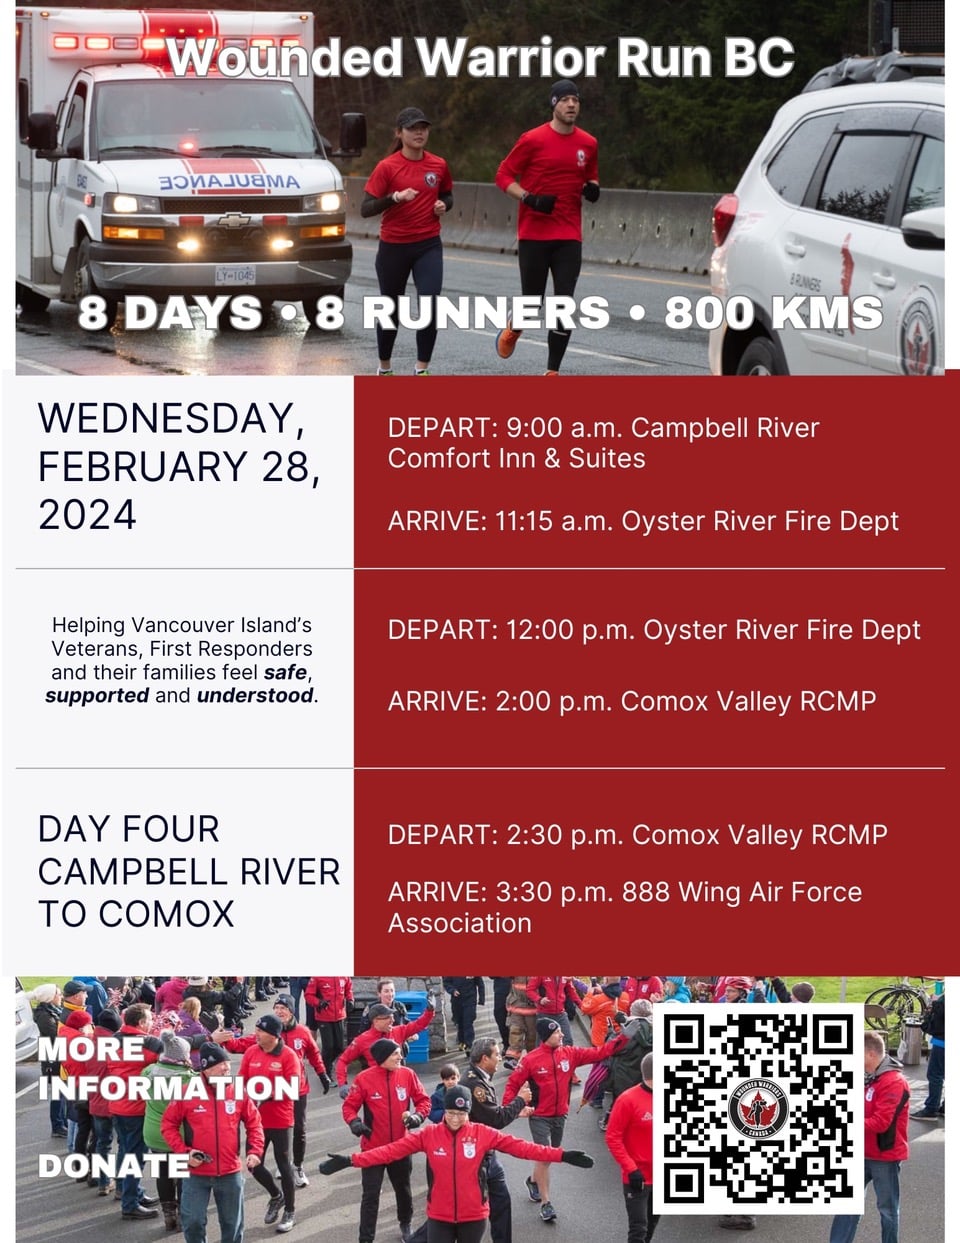 Wounded Warriors Run BC - Wednesday February 28, 2024 Day 4 Campbell River to Comox